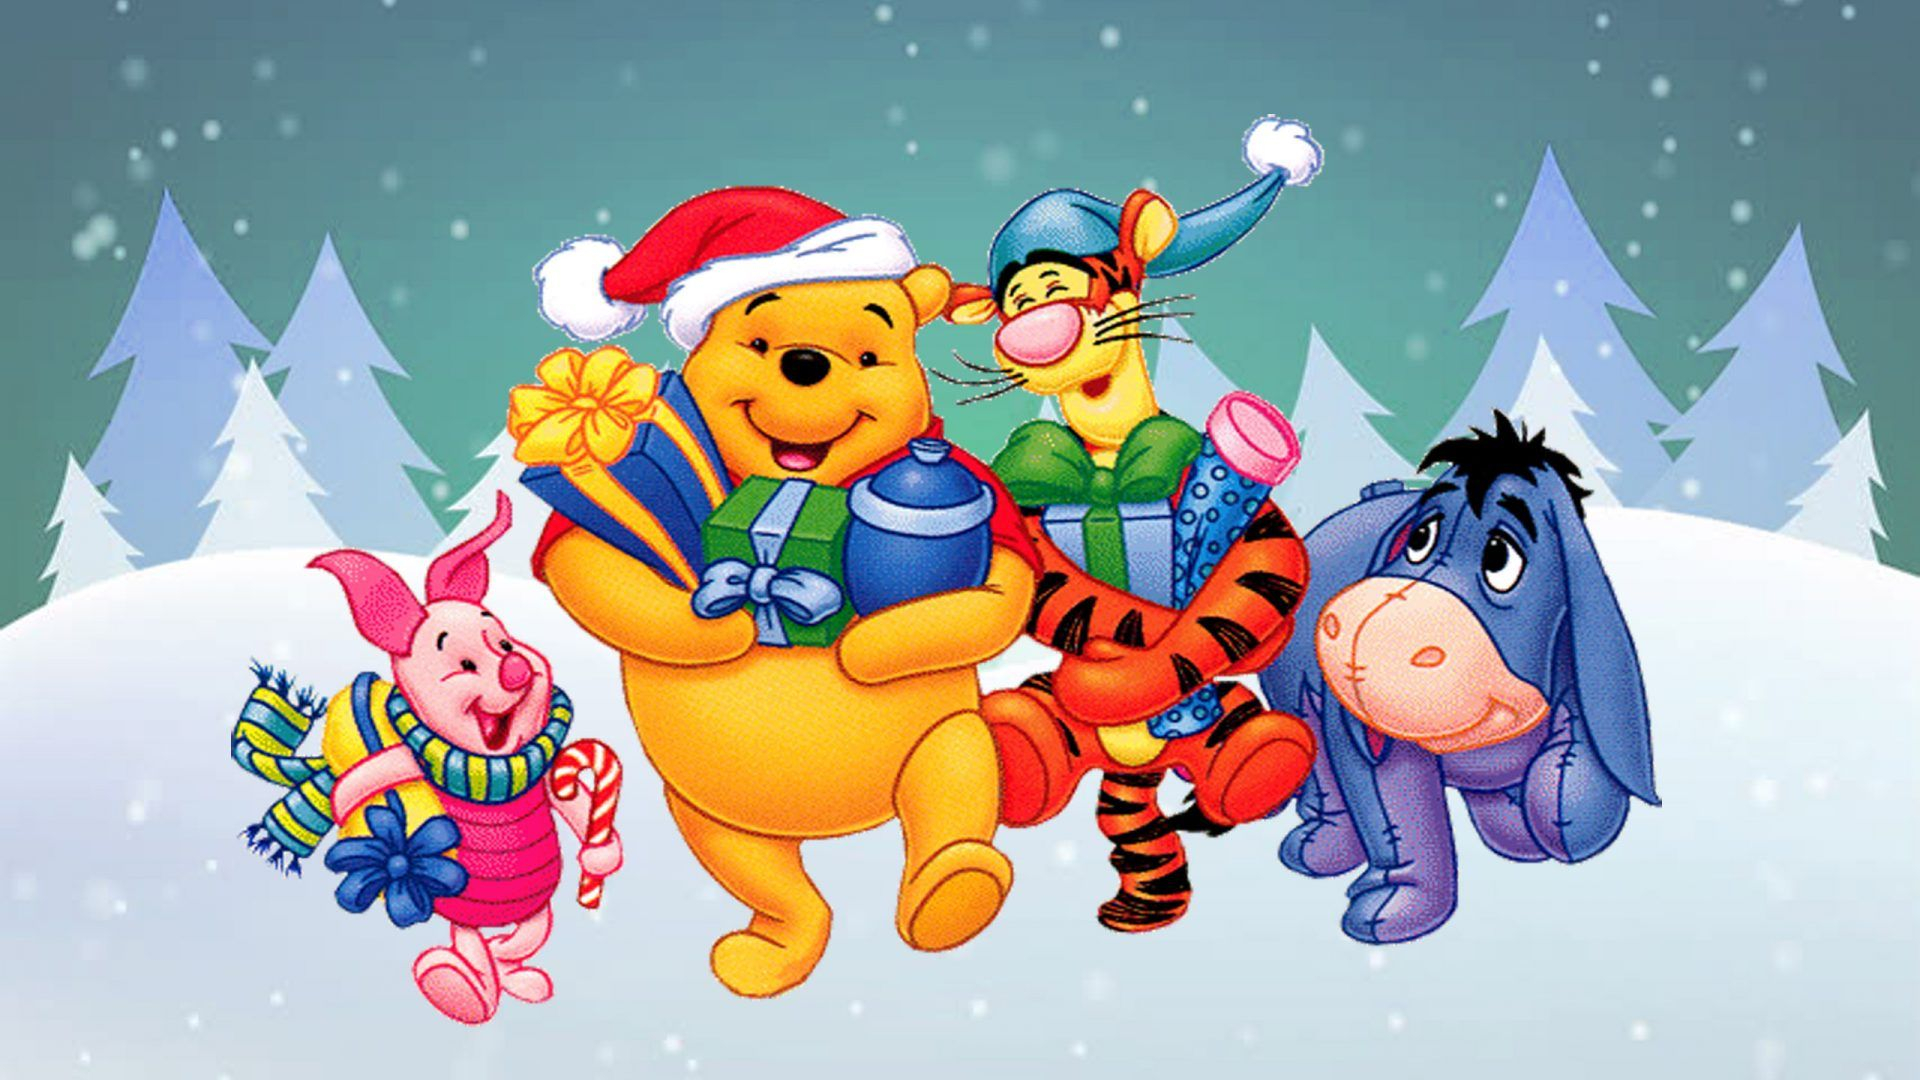 1920x1080 Winnie the Pooh Christmas Wallpapers Top Free Winnie the Pooh Christmas Backgrounds